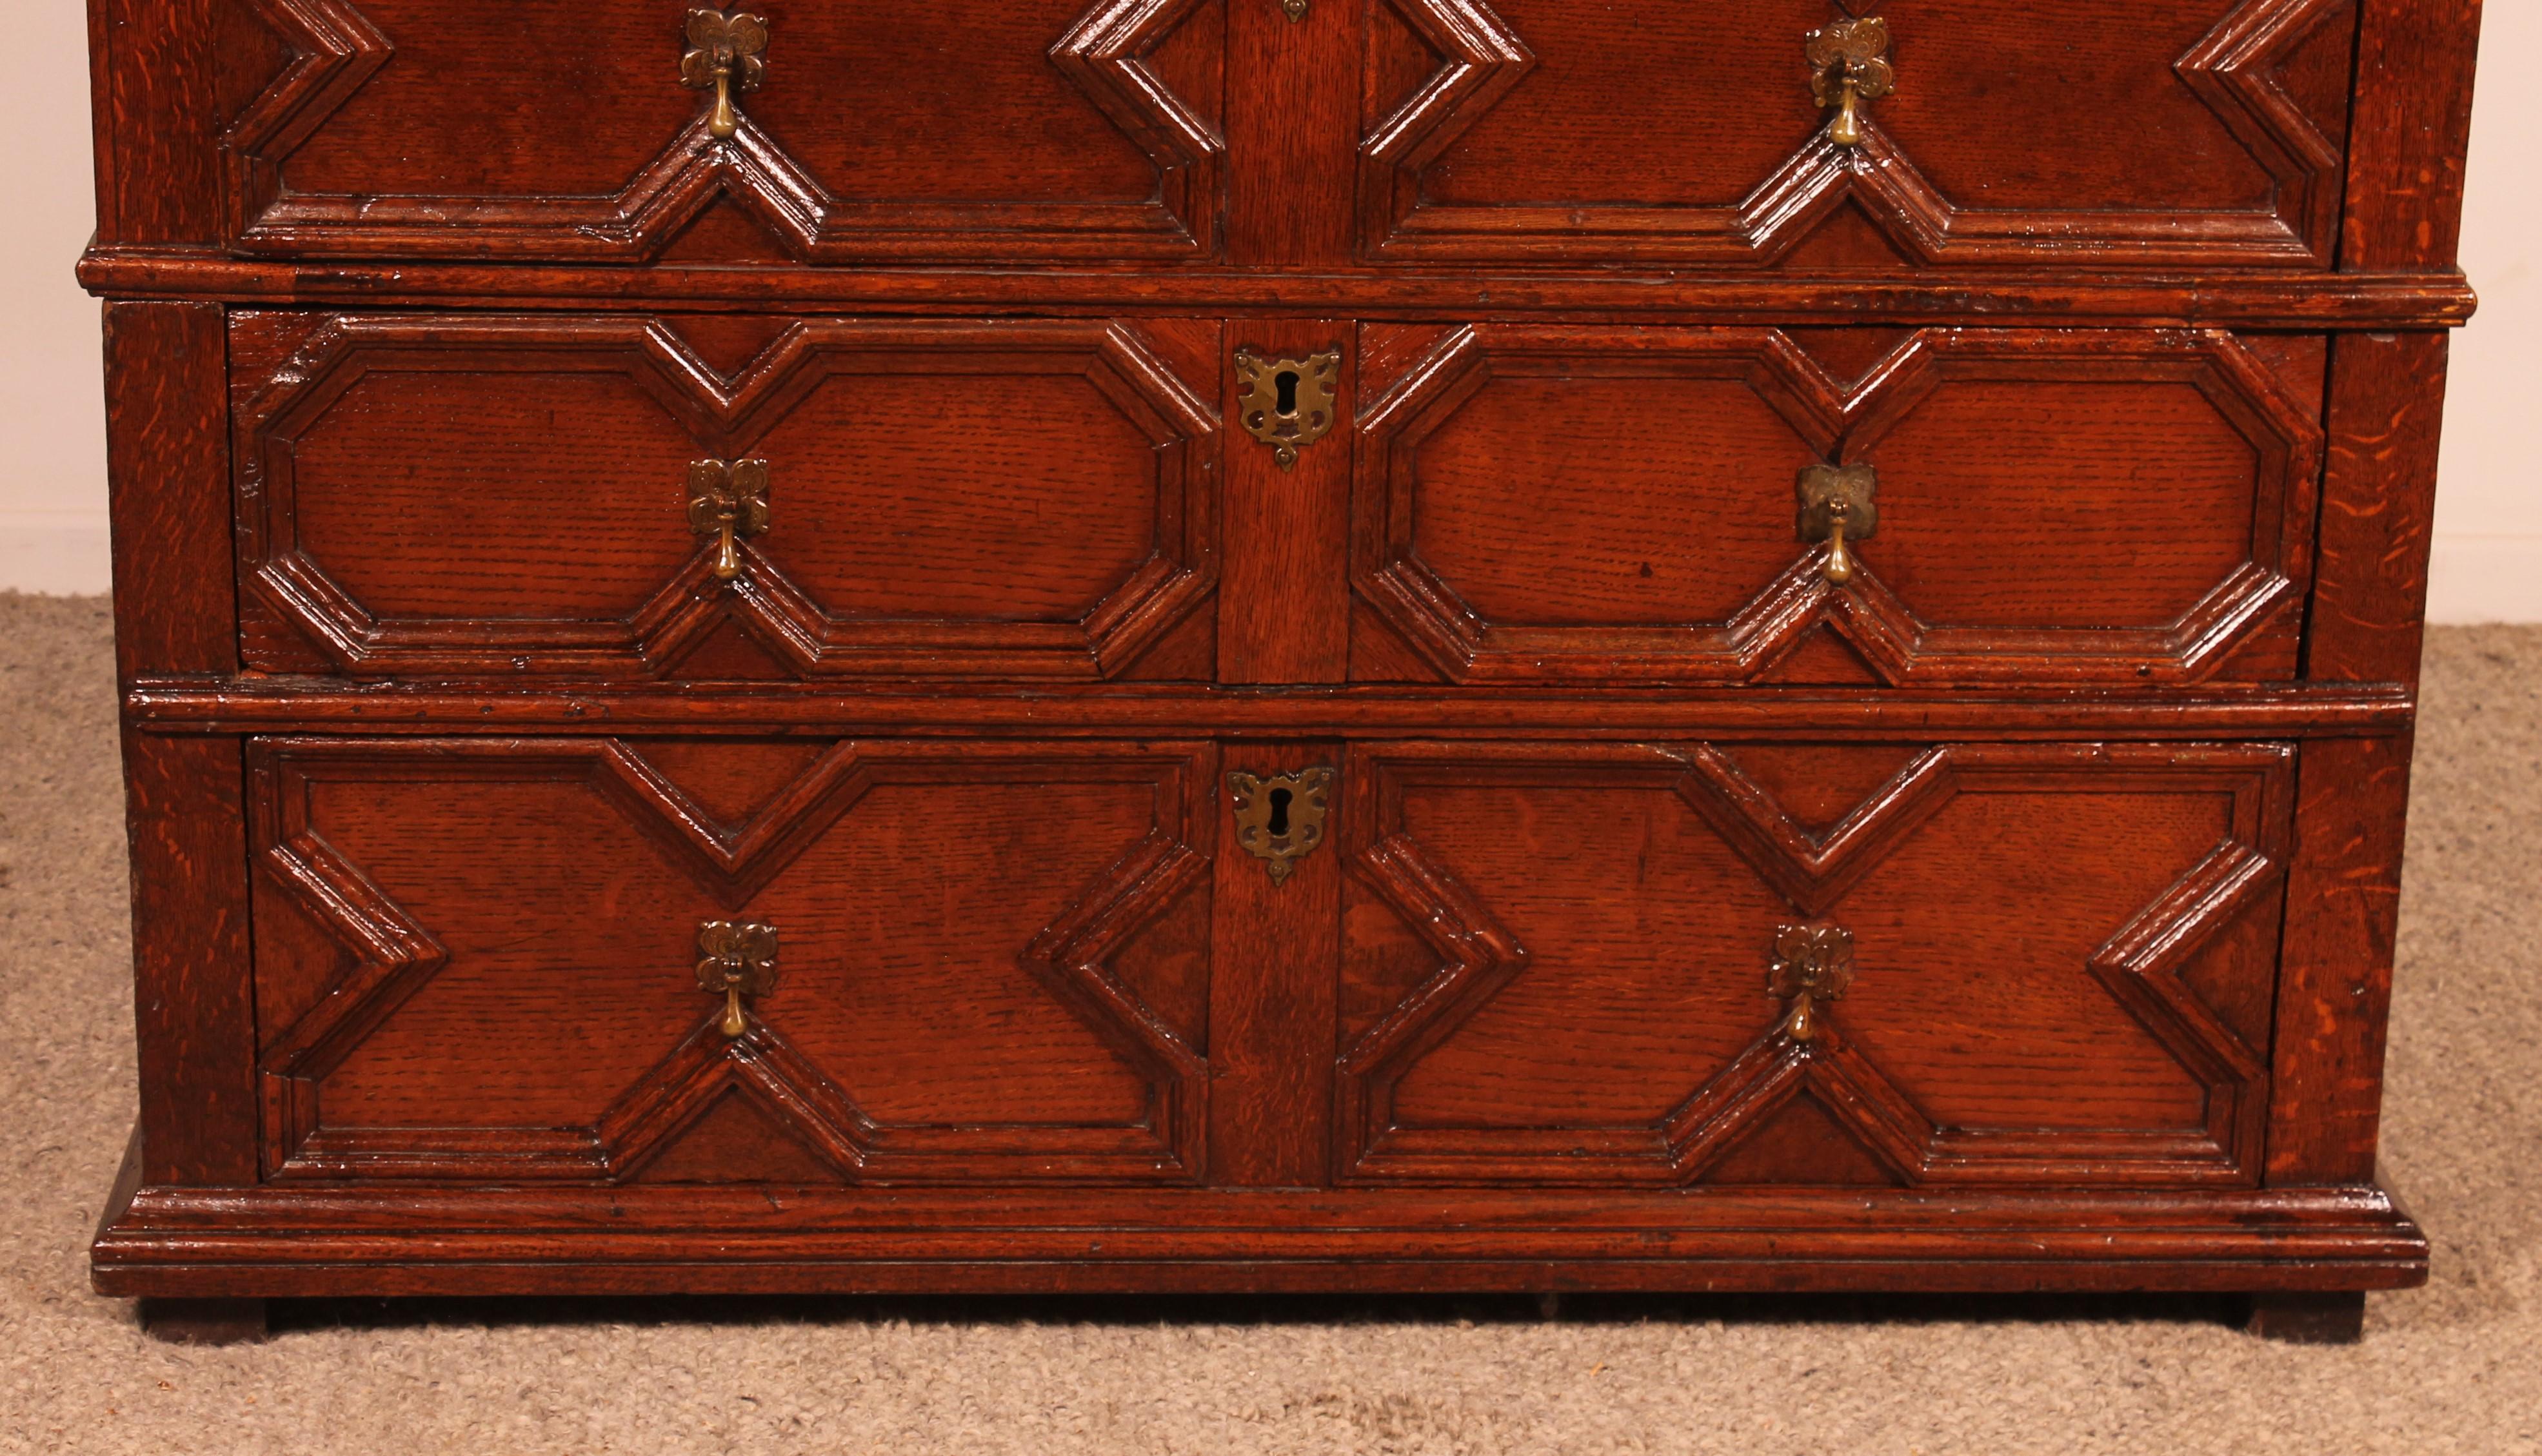 British Jacobean Period Chest Of Drawers In Oak From The 17th Century For Sale